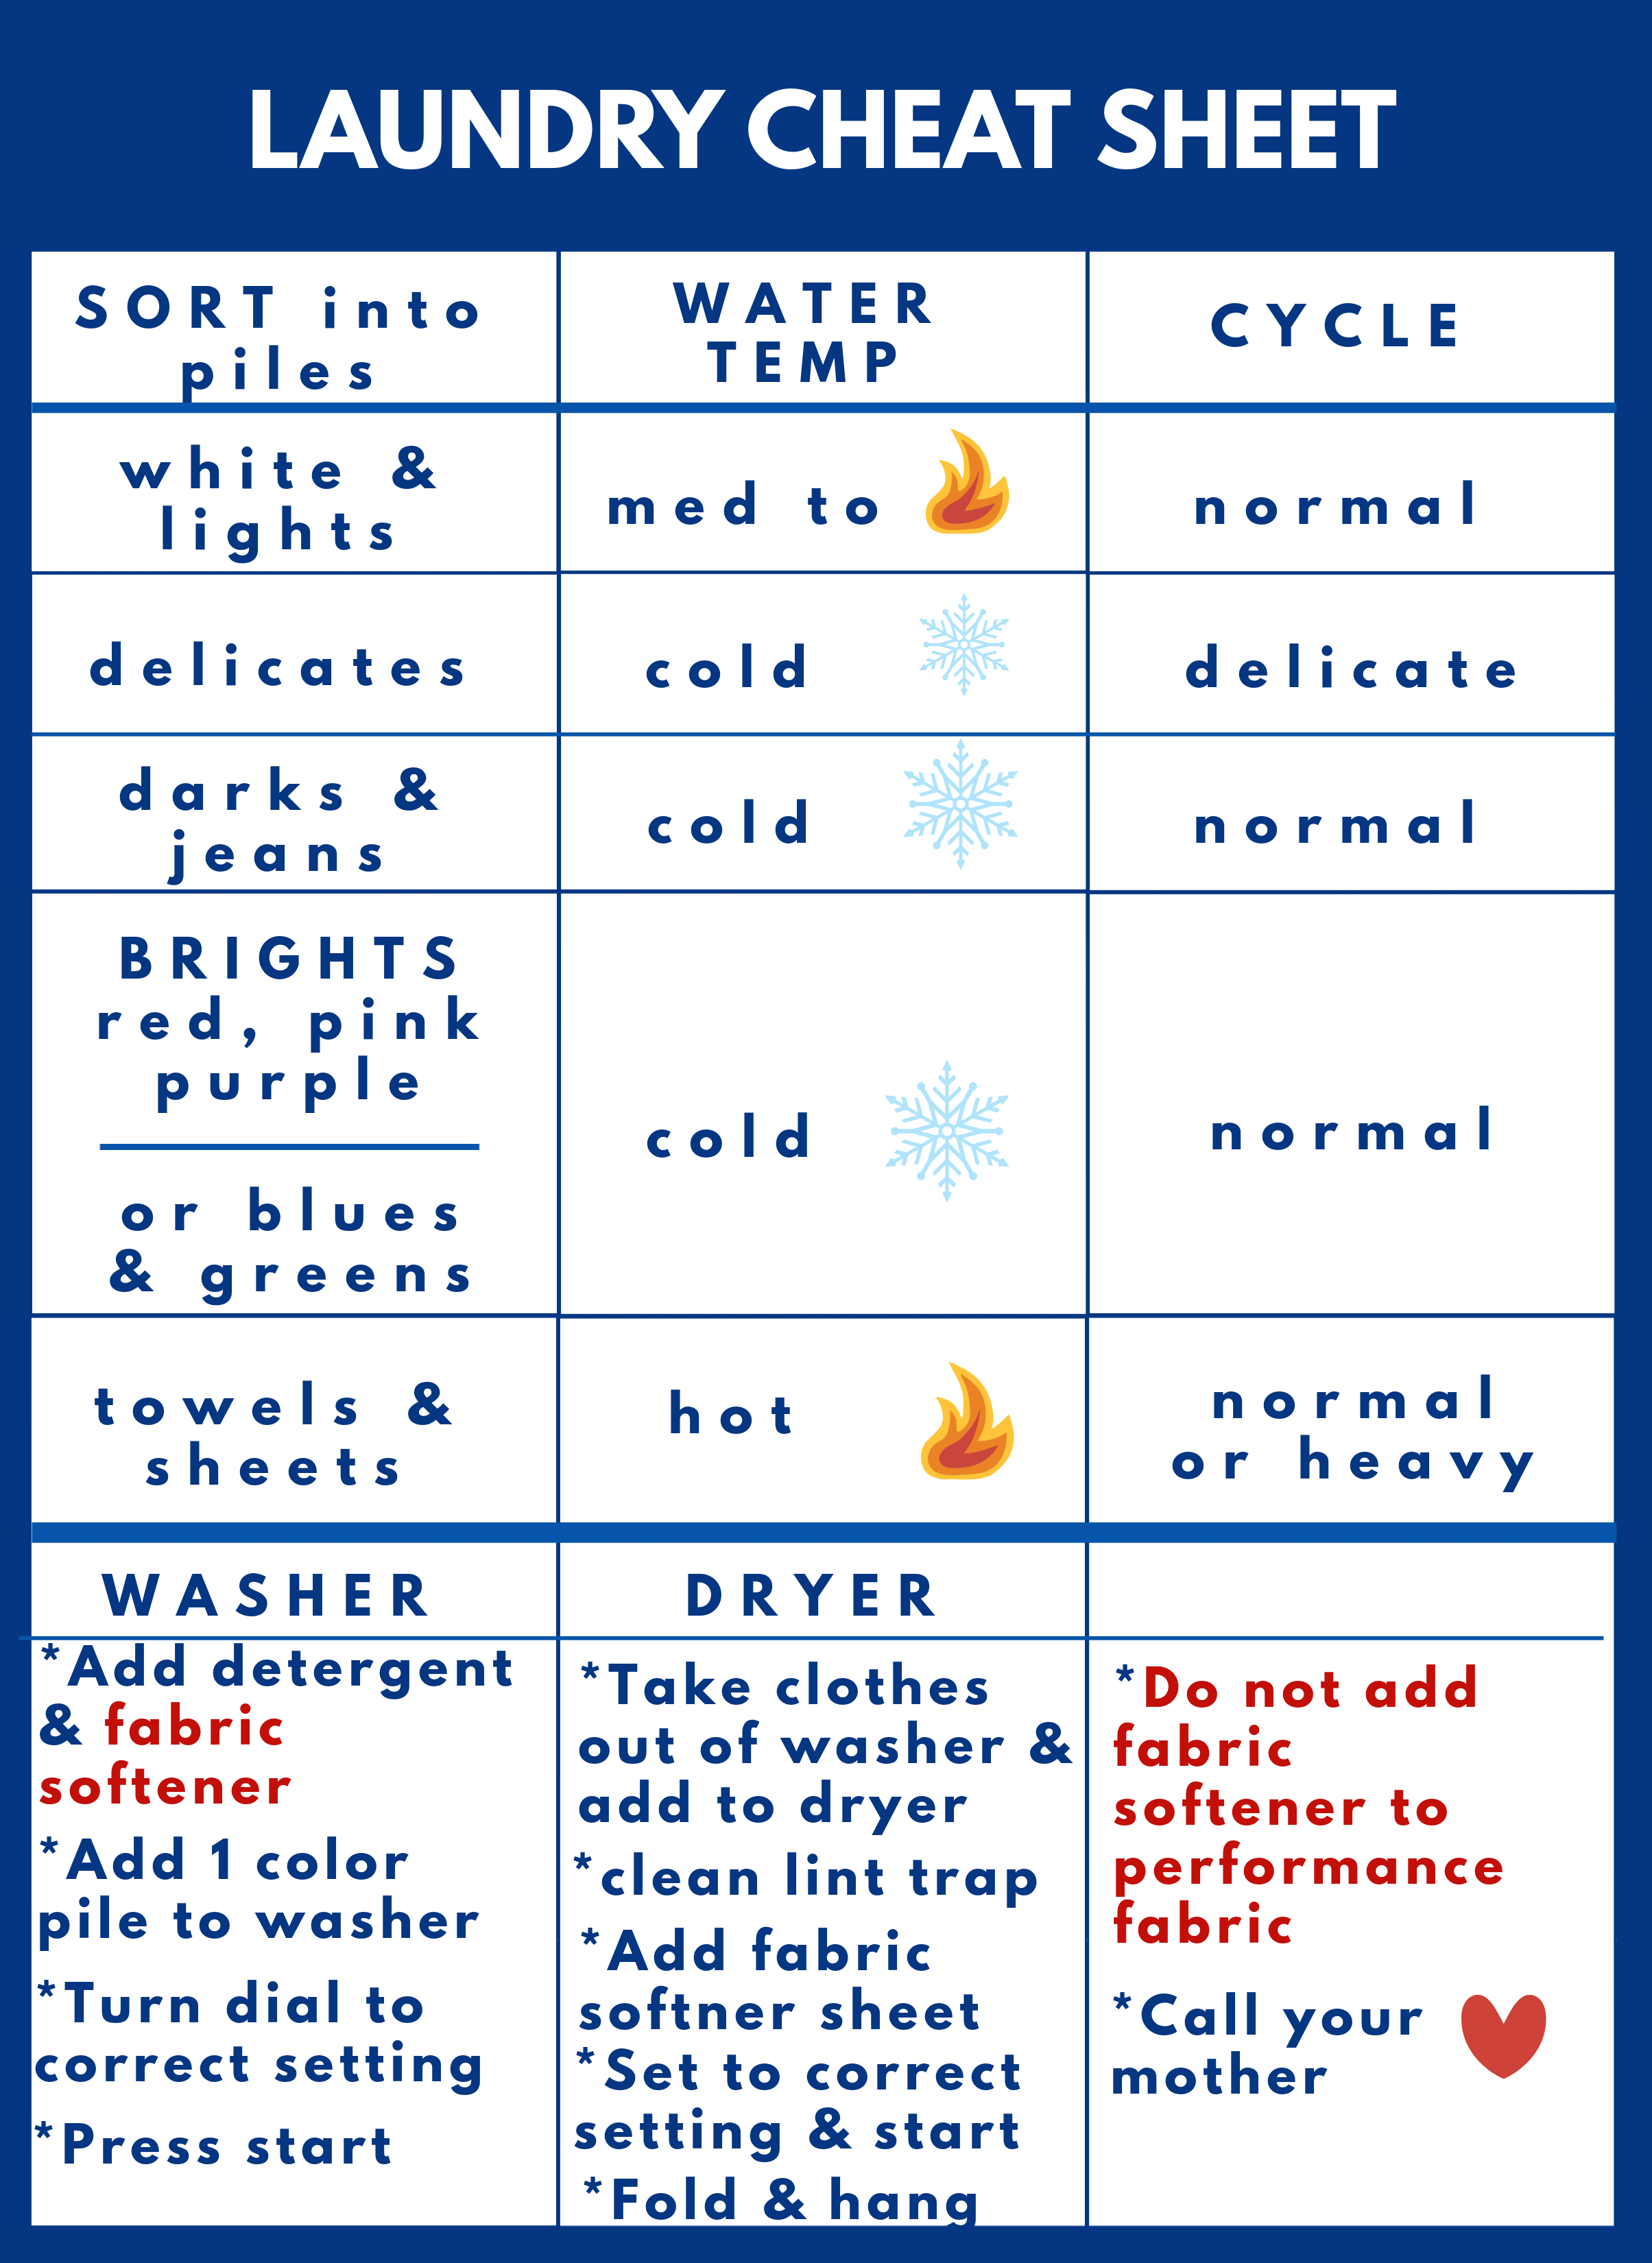 table of laundry cheat sheet for washing clothes